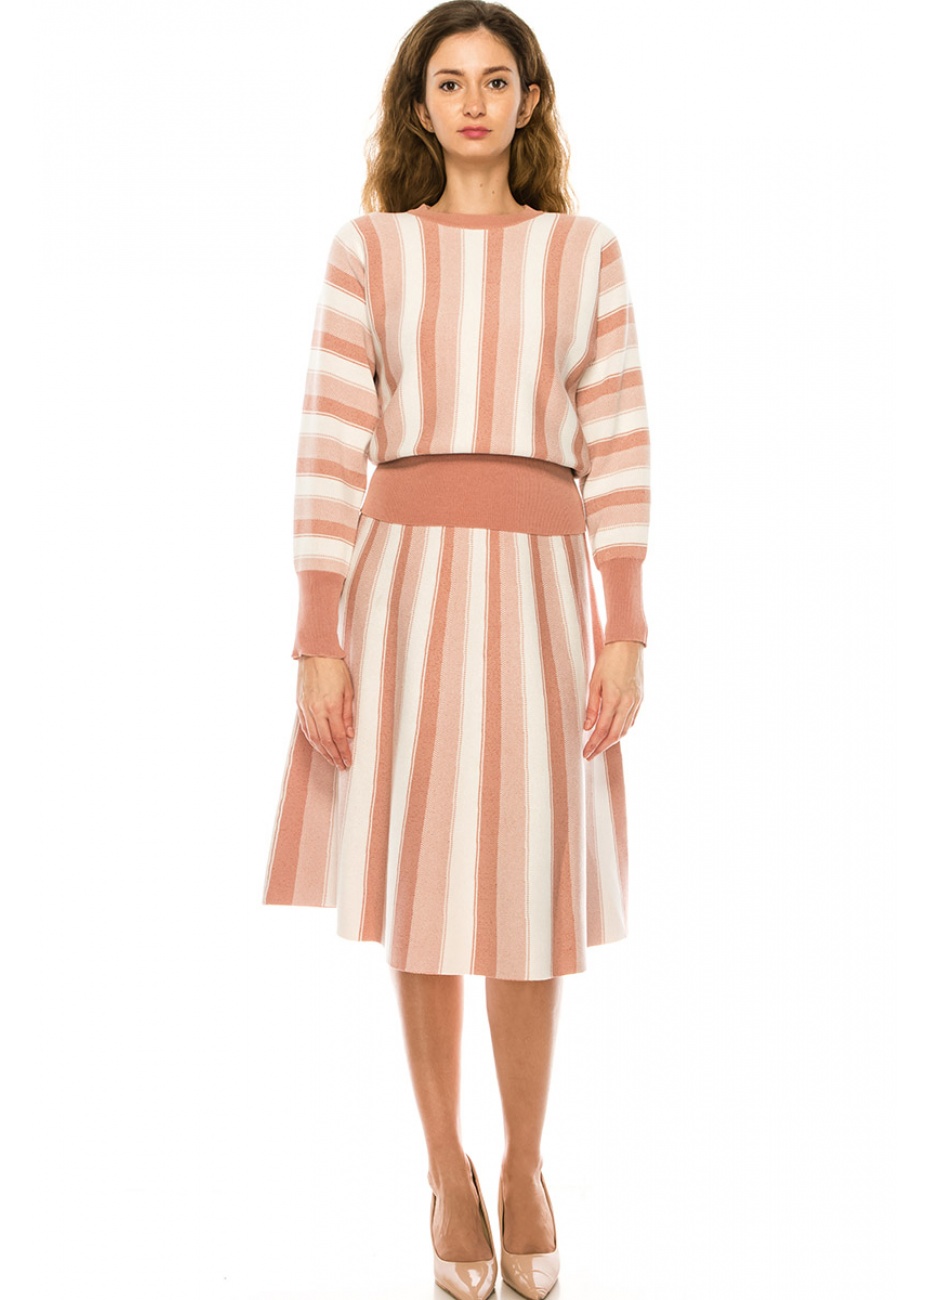 Striped Midi Knit Skirt in Pink And White